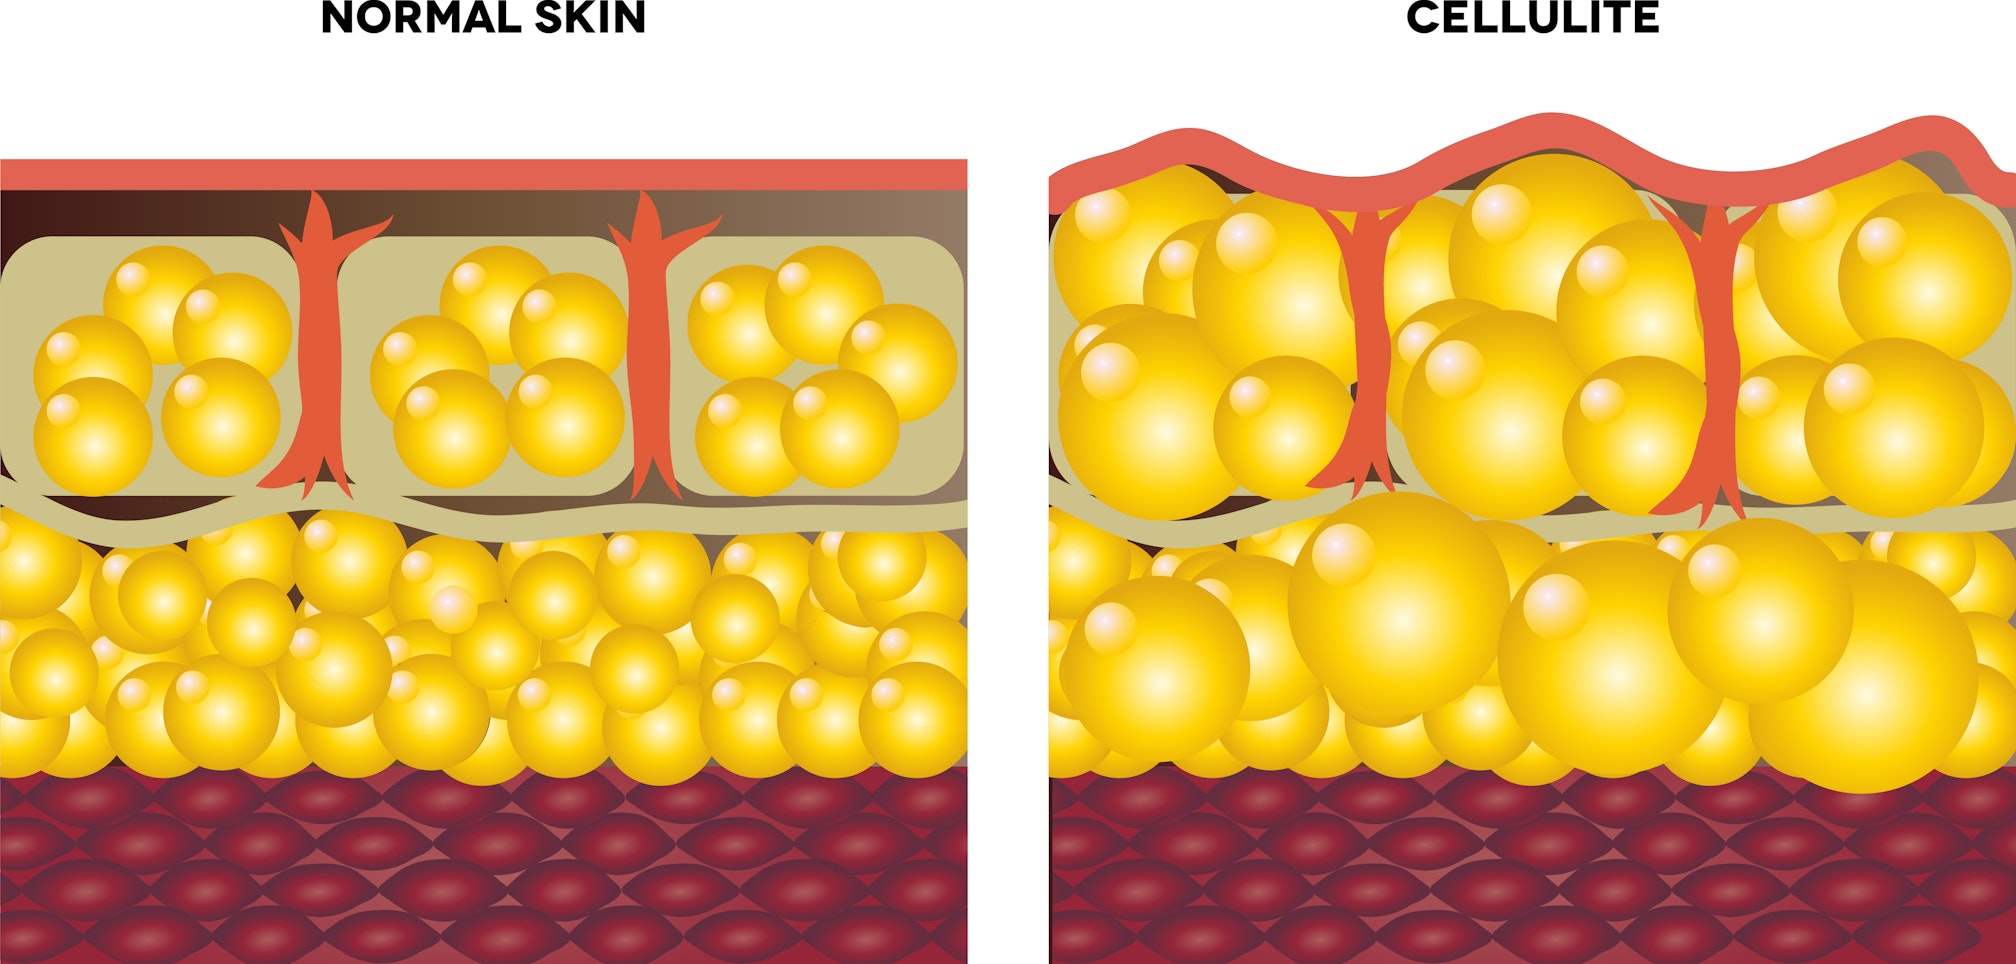 graphic showing Cellulite and normal skin depictions